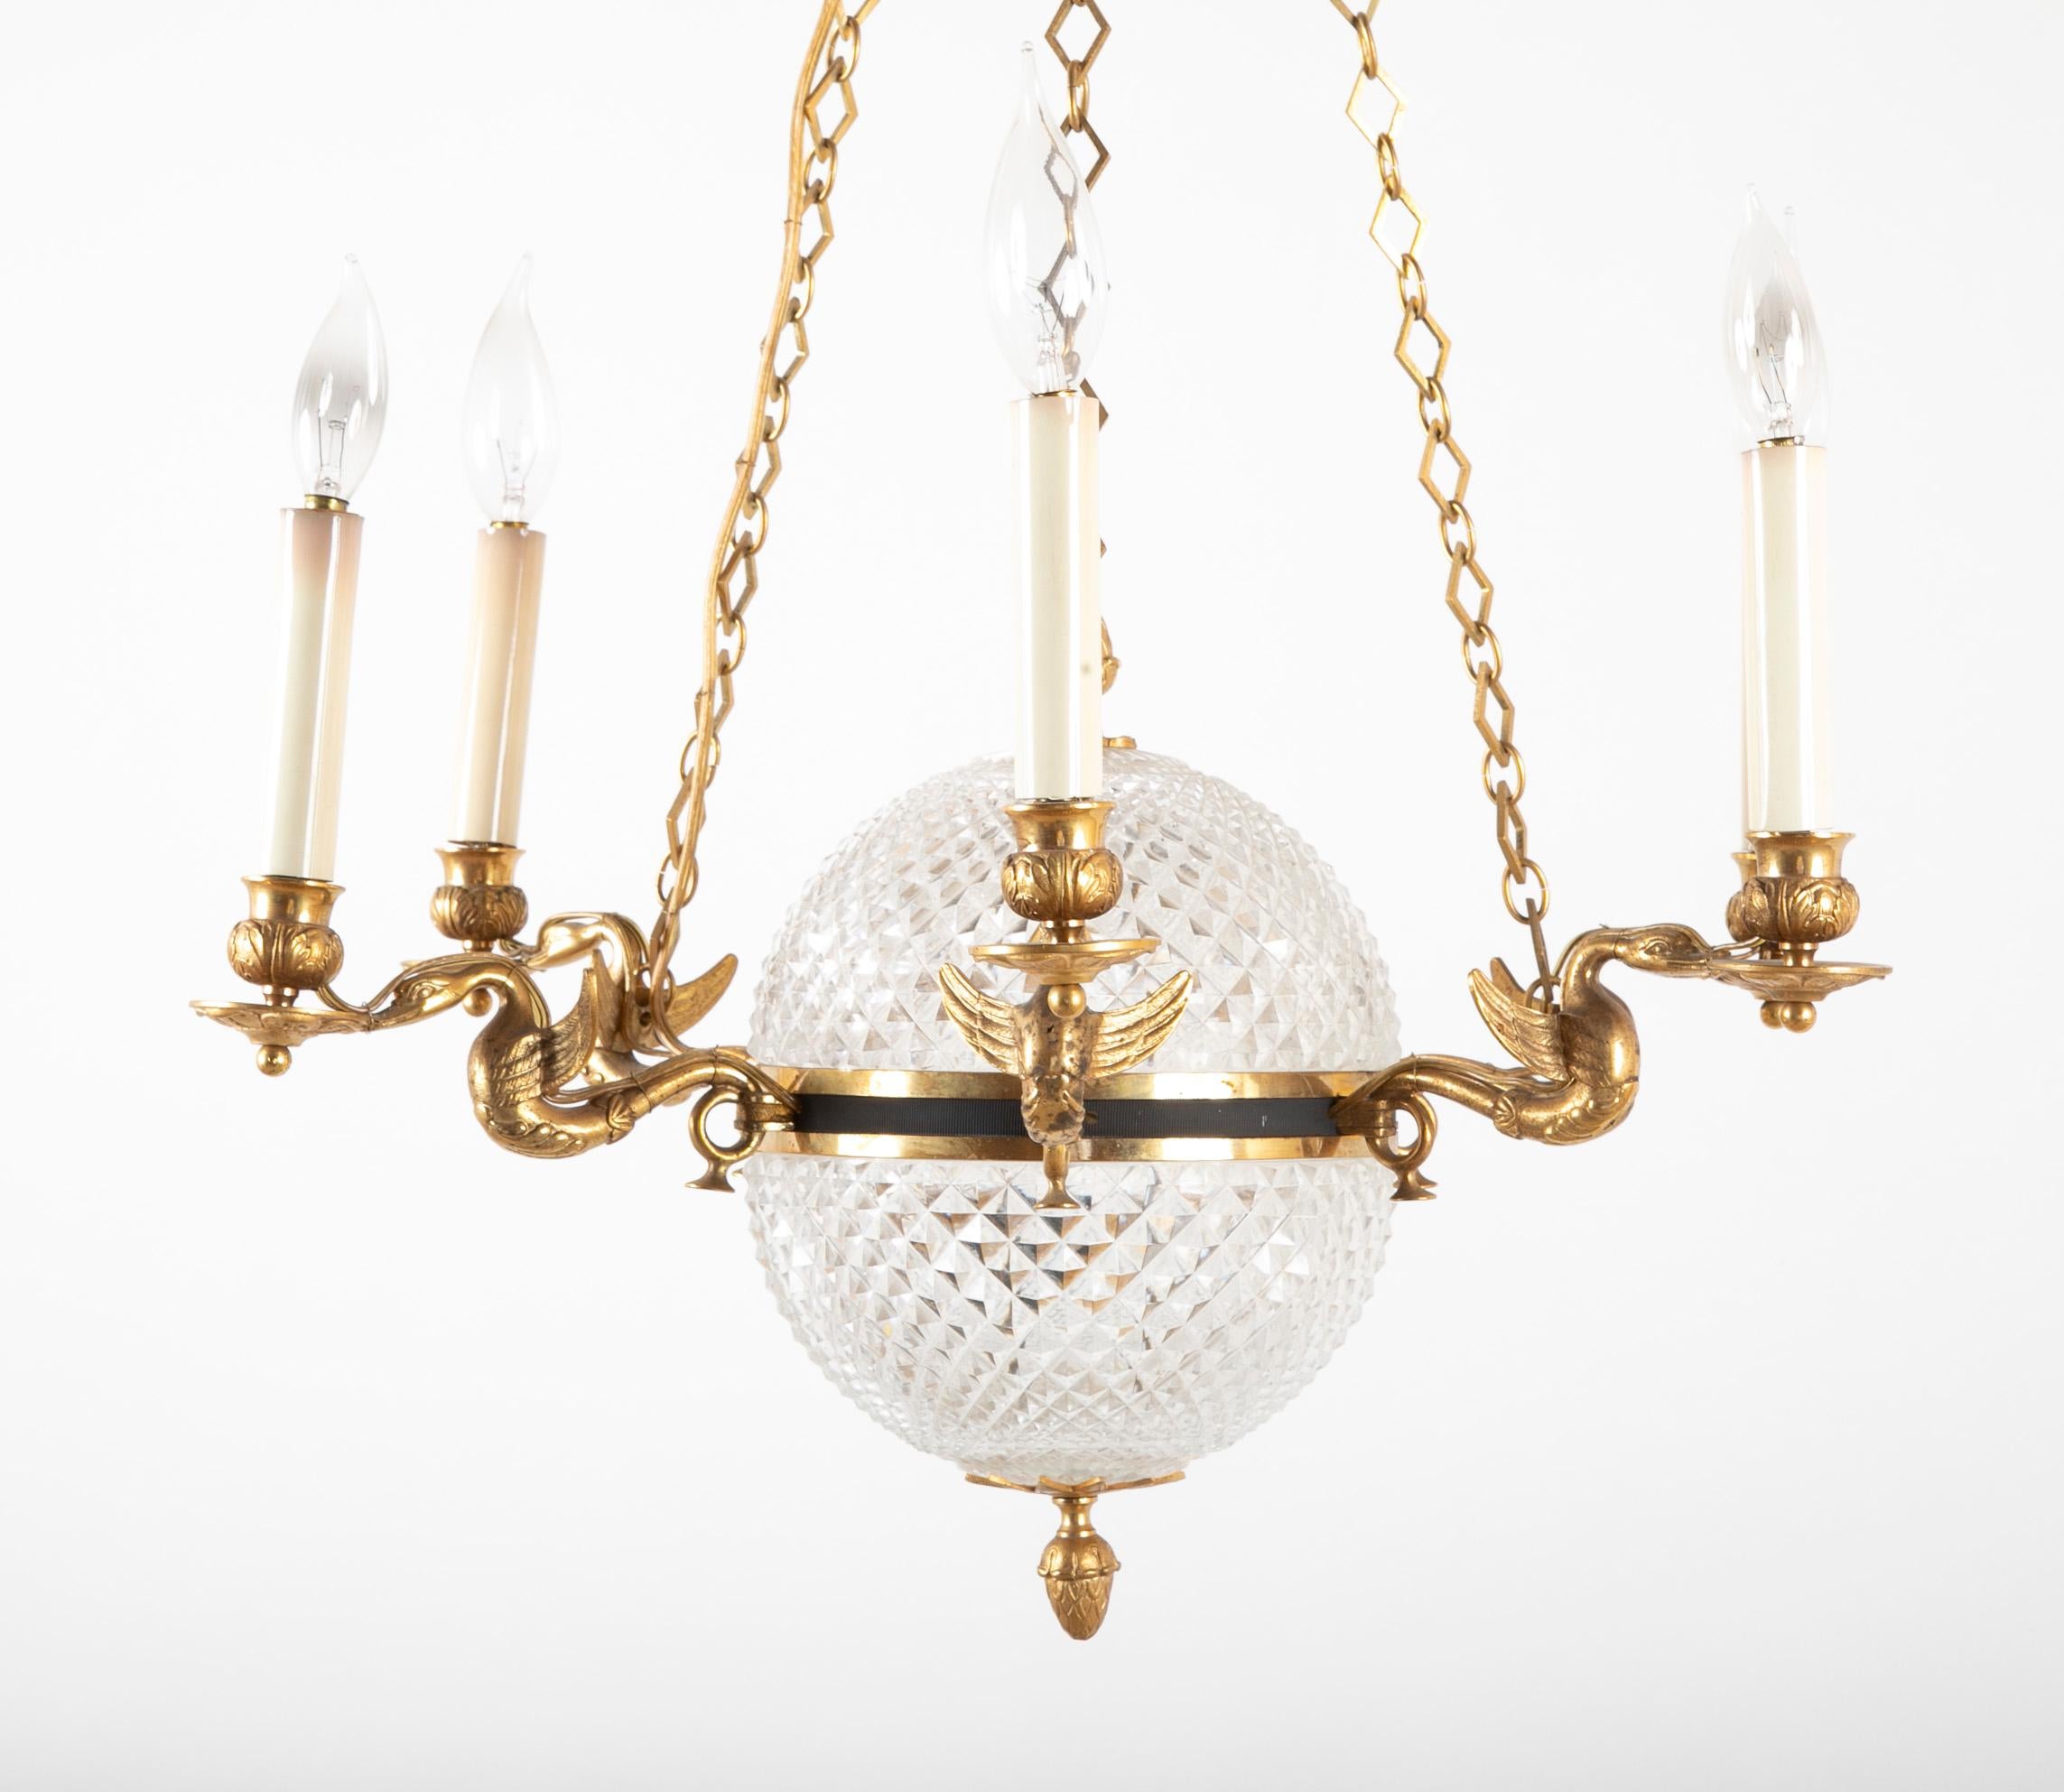 Baltic Cut Crystal Chandelier with Central Globe, Swan Arms and Elaborate Crown